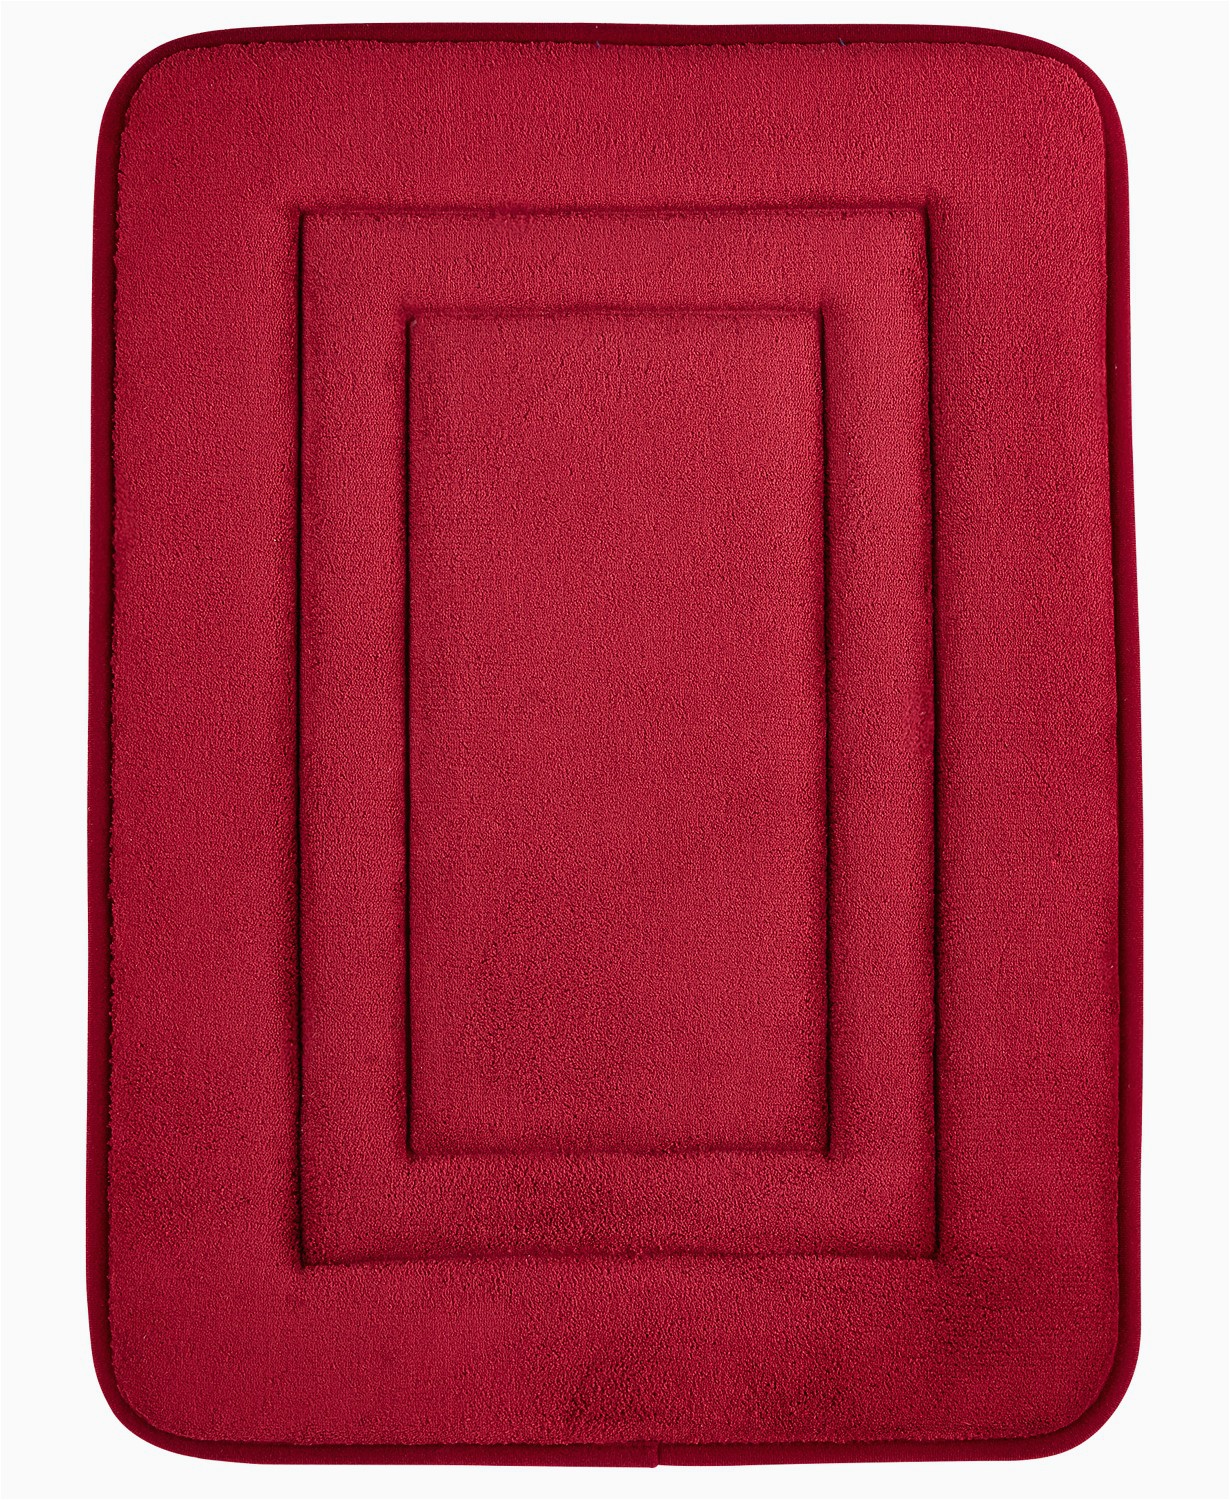 Sunham Home Fashions Bathroom Rugs Sunham Inspire Plus Bath Rug Features Unique 3d Fiber Structure Brings Stylish and Functional Flair to Your Décor 17 Inch by 24 Inch Red